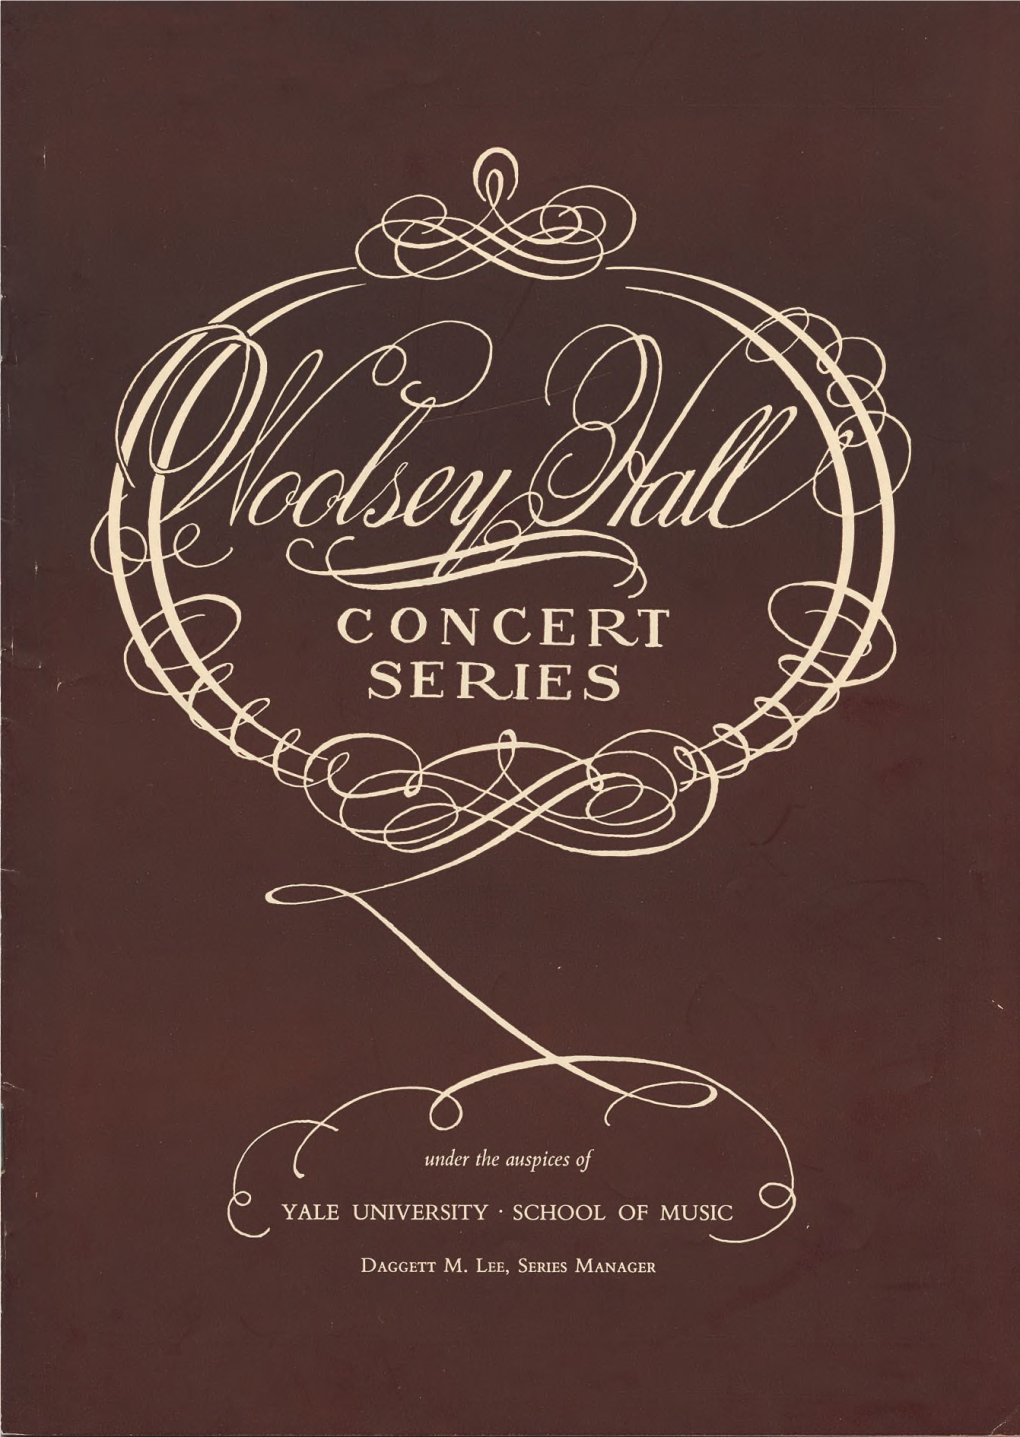 WOOLSEY HALL CONCERT SERIES Quality Stationery, Greeting Cards, Novelty Gift Items